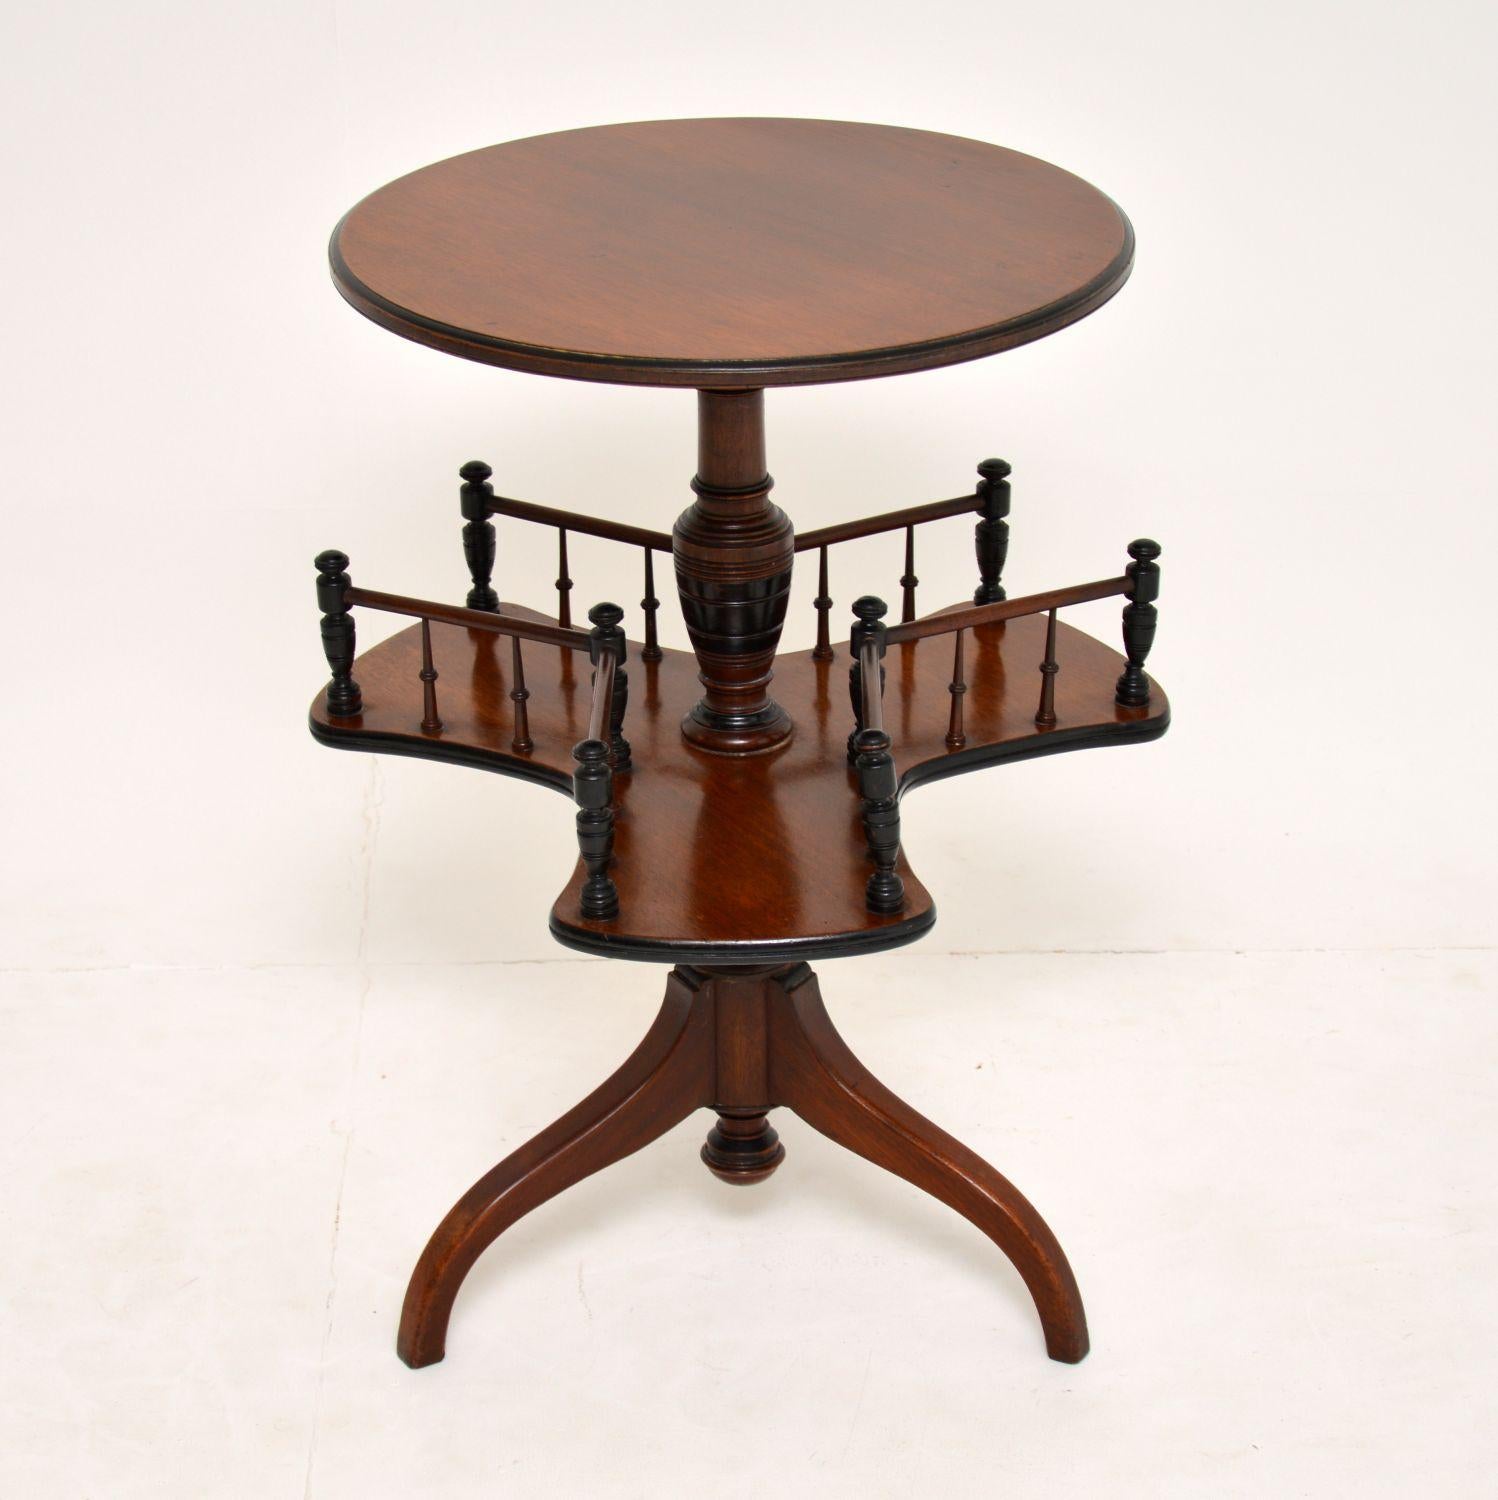 Antique Victorian mahogany occasional table with a circular top and a revolving galleried section in the middle. It’s in very good original condition and I would date it to circa 1880s period.

Please enlarge all the images to see up close all the